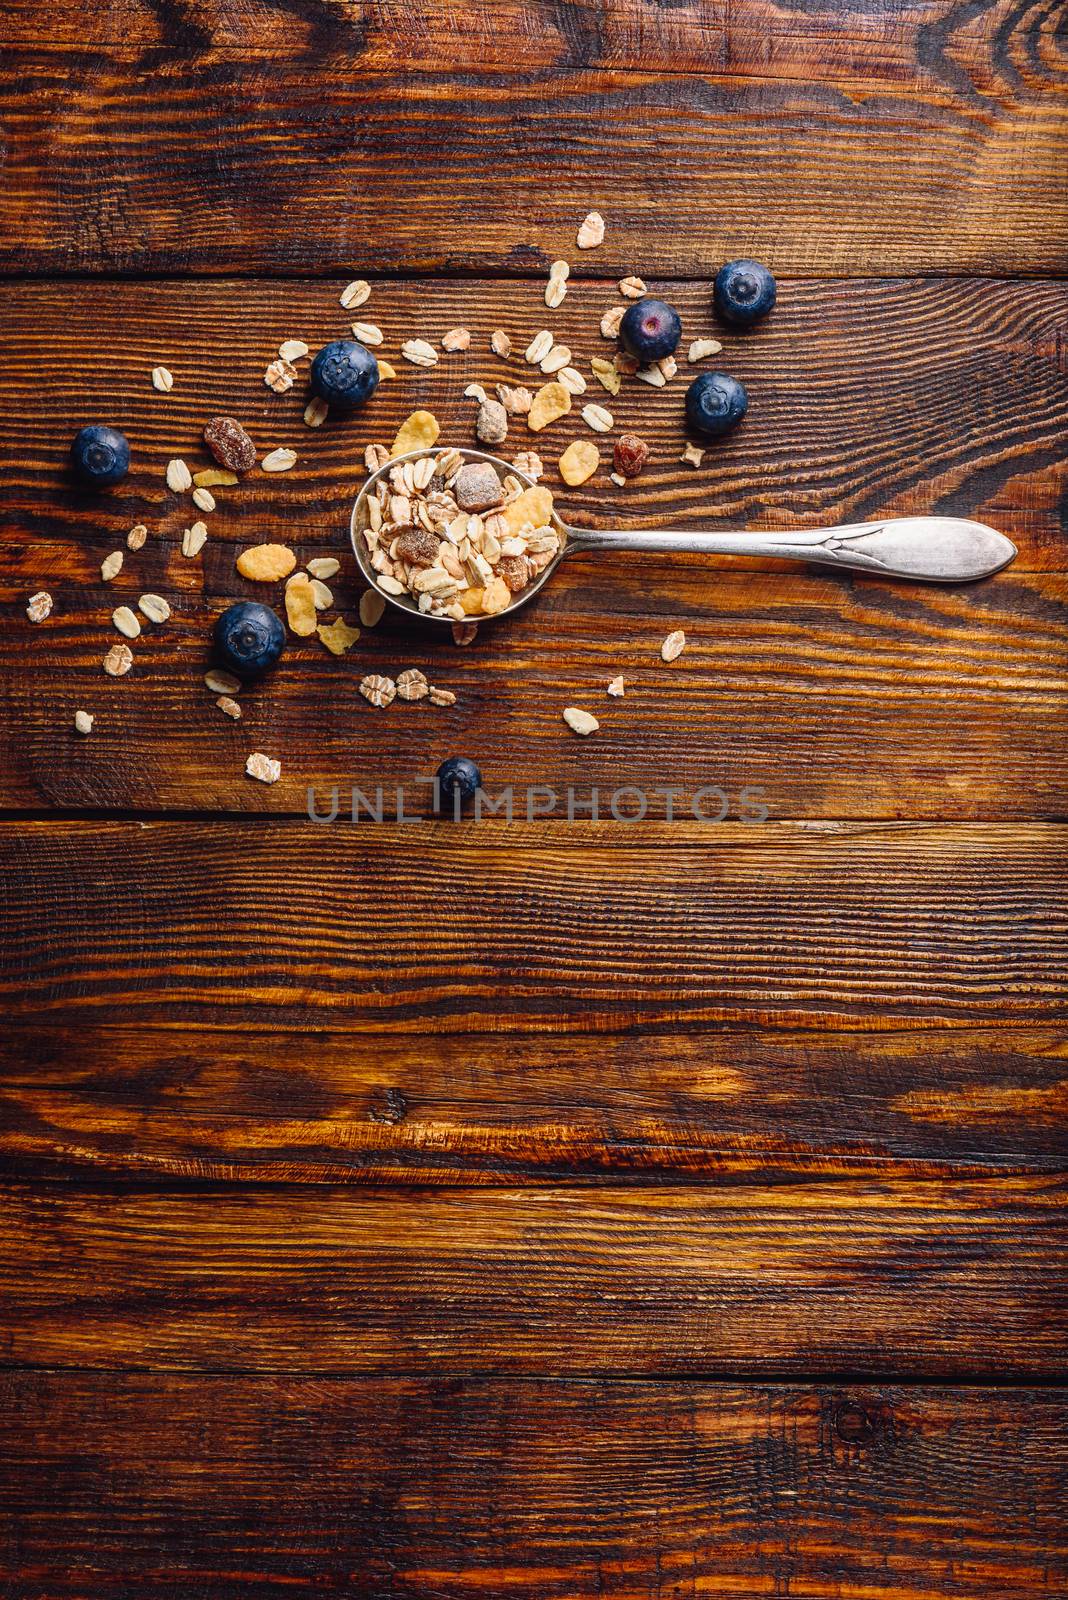 Spoonful of Granola and Blueberry on Wooden Table. View from Above. Vertical Orientation and Copy Space.